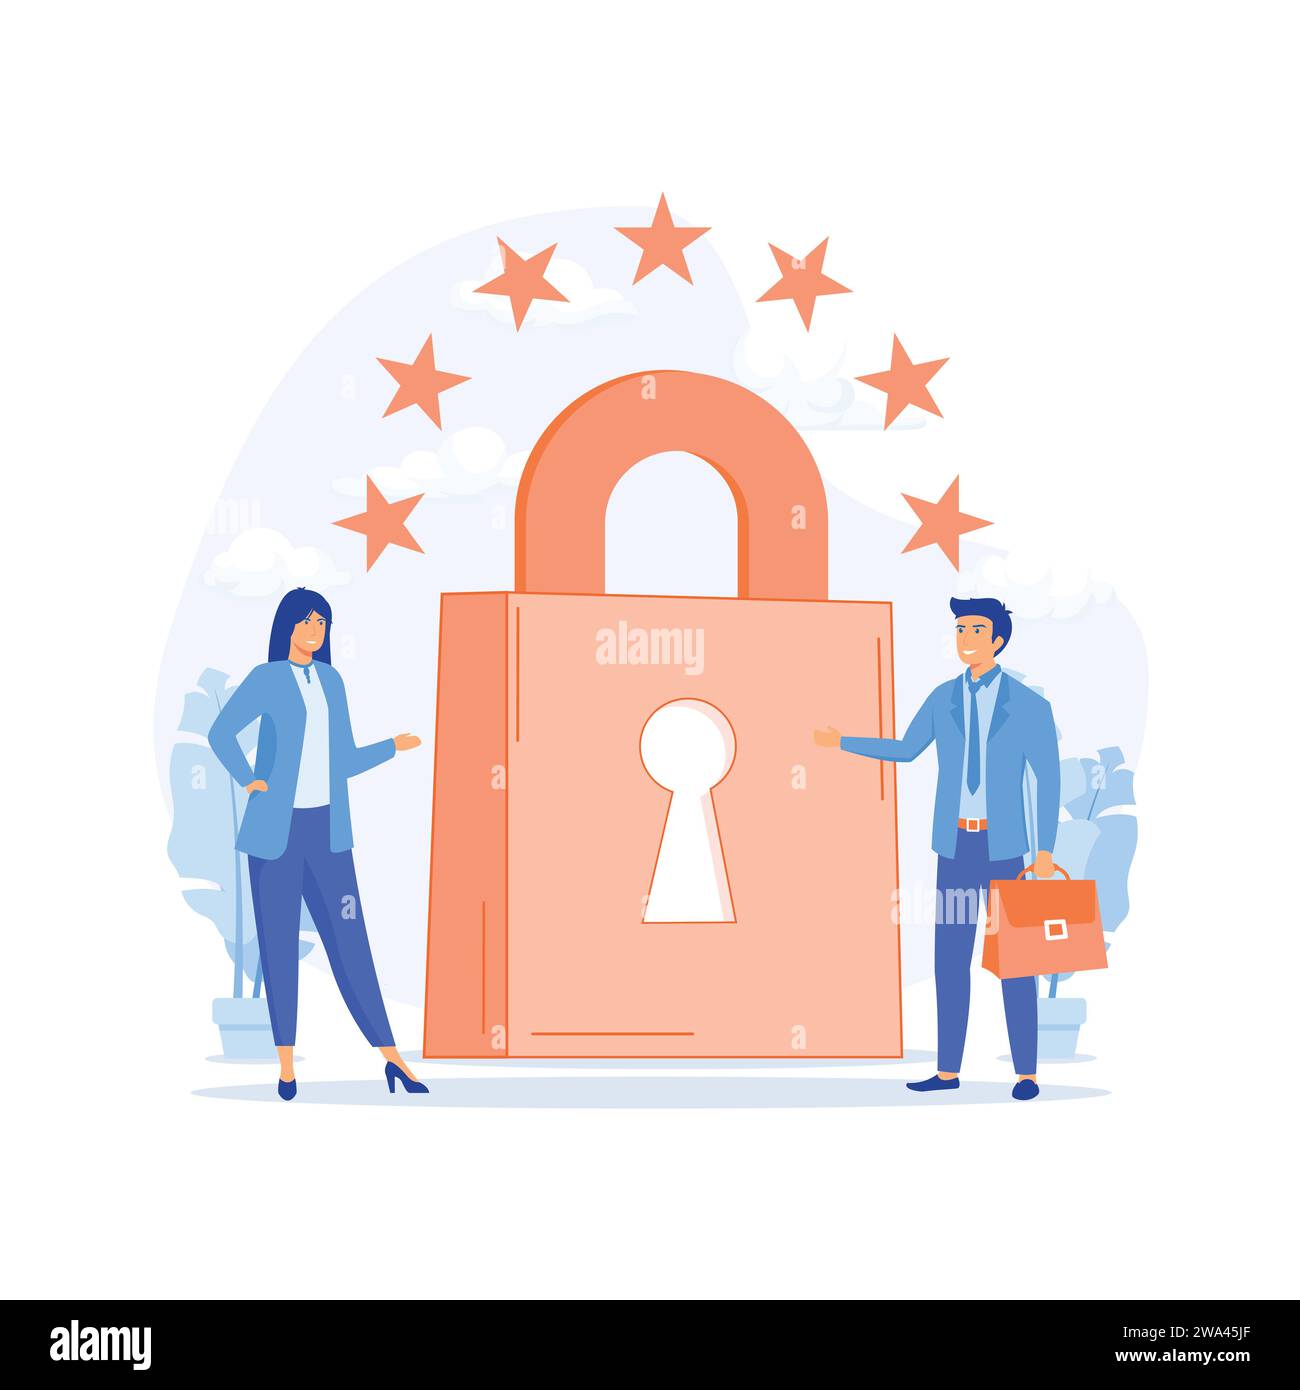 General Privacy. The European Commission strengthens and unifies the protection of personal data, flat vector modern illustration Stock Vector